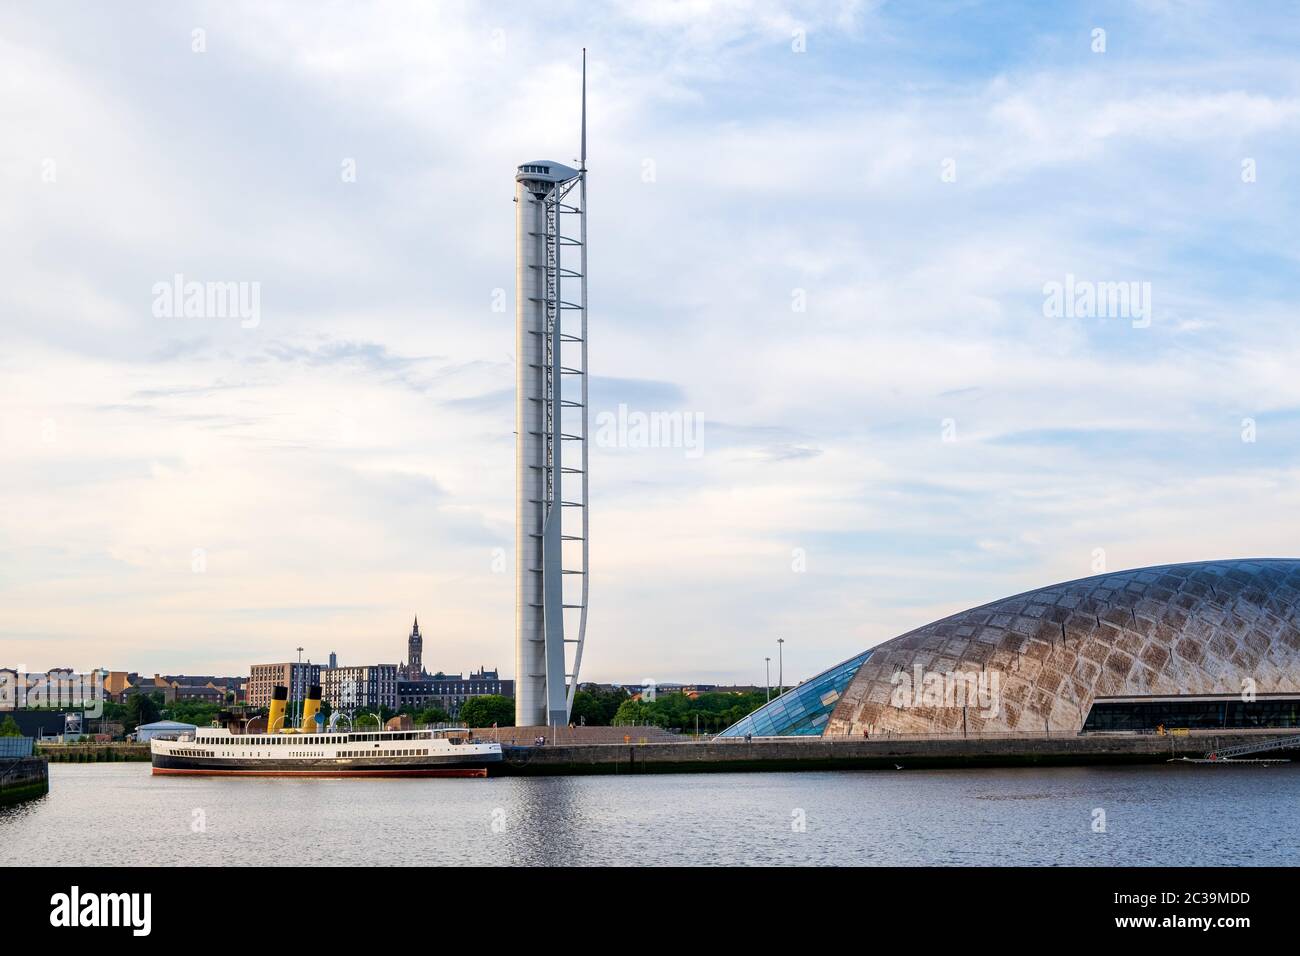 Glasgow Science Centre, Tower, SEC, BBC Pacific Quay and the Queen Mary. Stock Photo